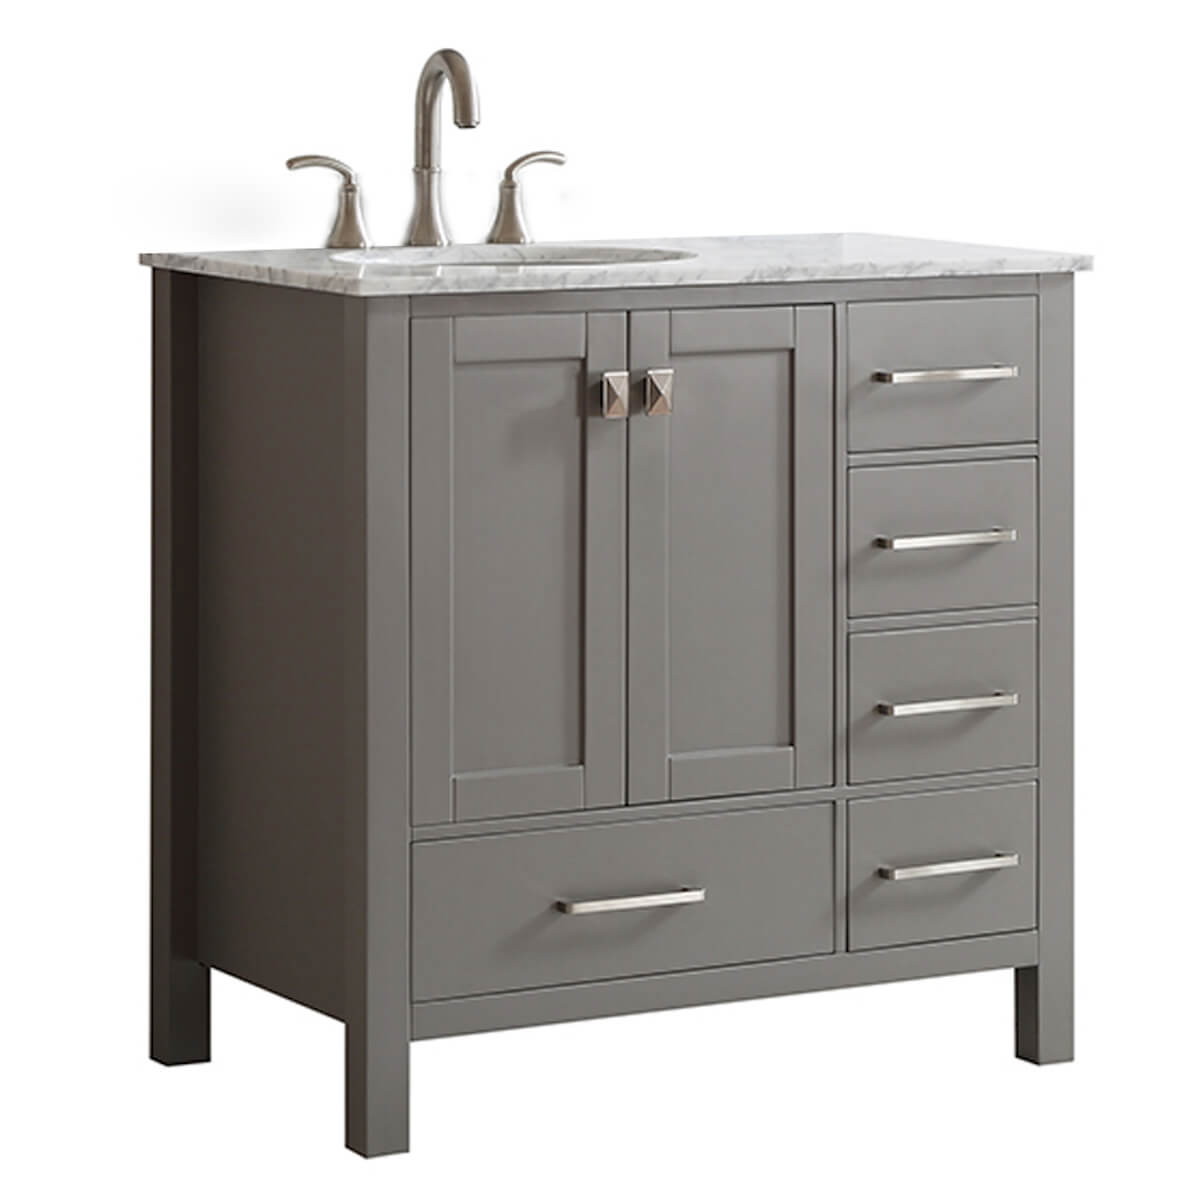 Vinnova 36” Gela Grey Freestanding Single Vanity with Carrara White Marble Countertop Without Mirror Side 723036-GR-CA-NM